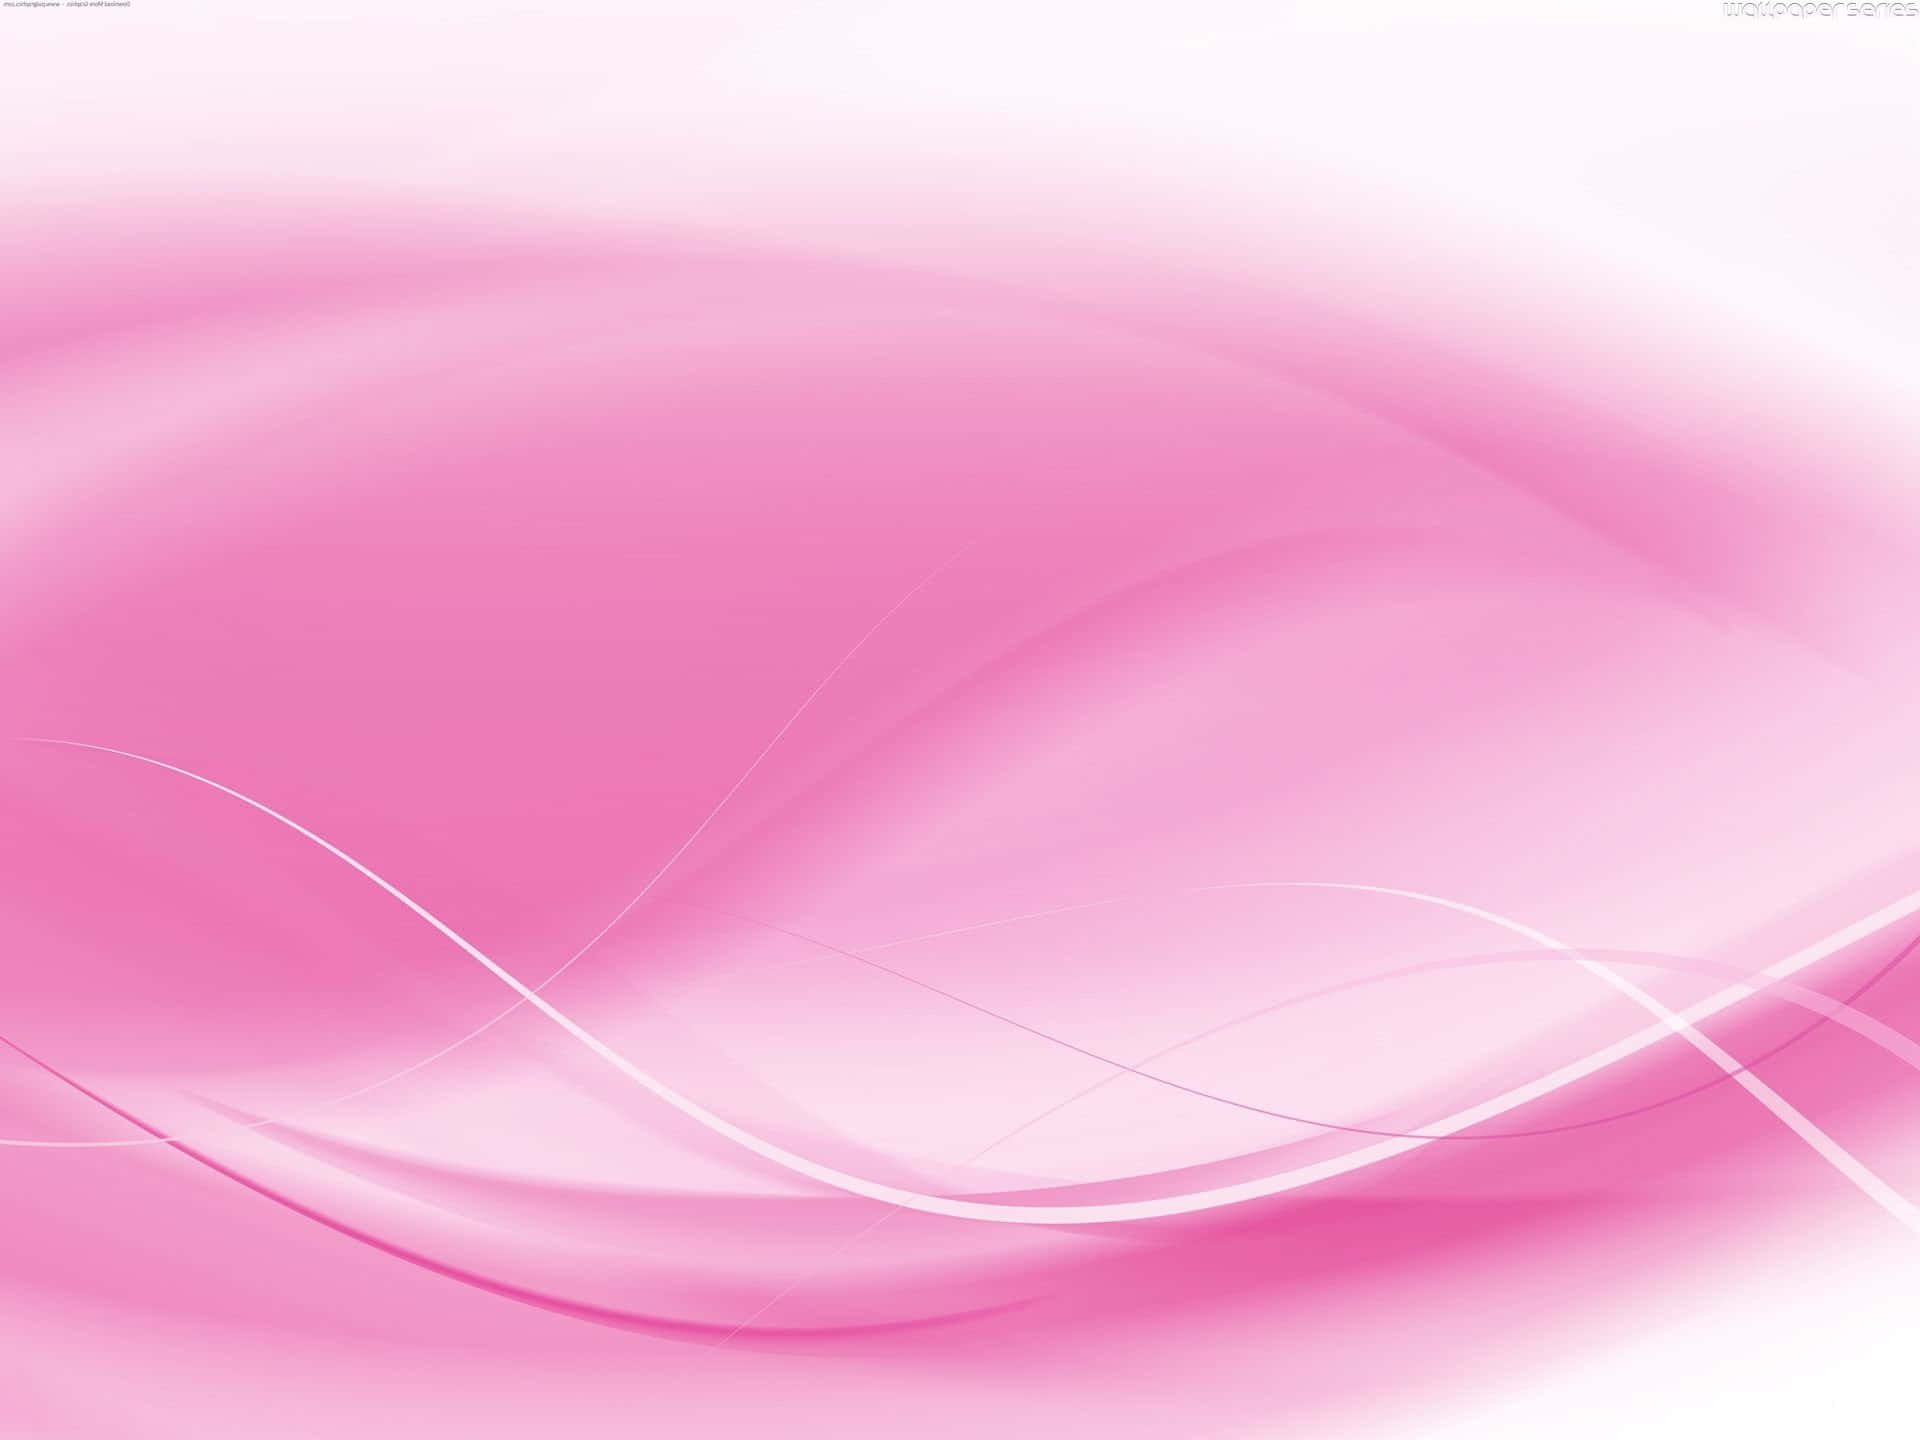 Download Captivating Pink Abstract Swirls Wallpaper | Wallpapers.com